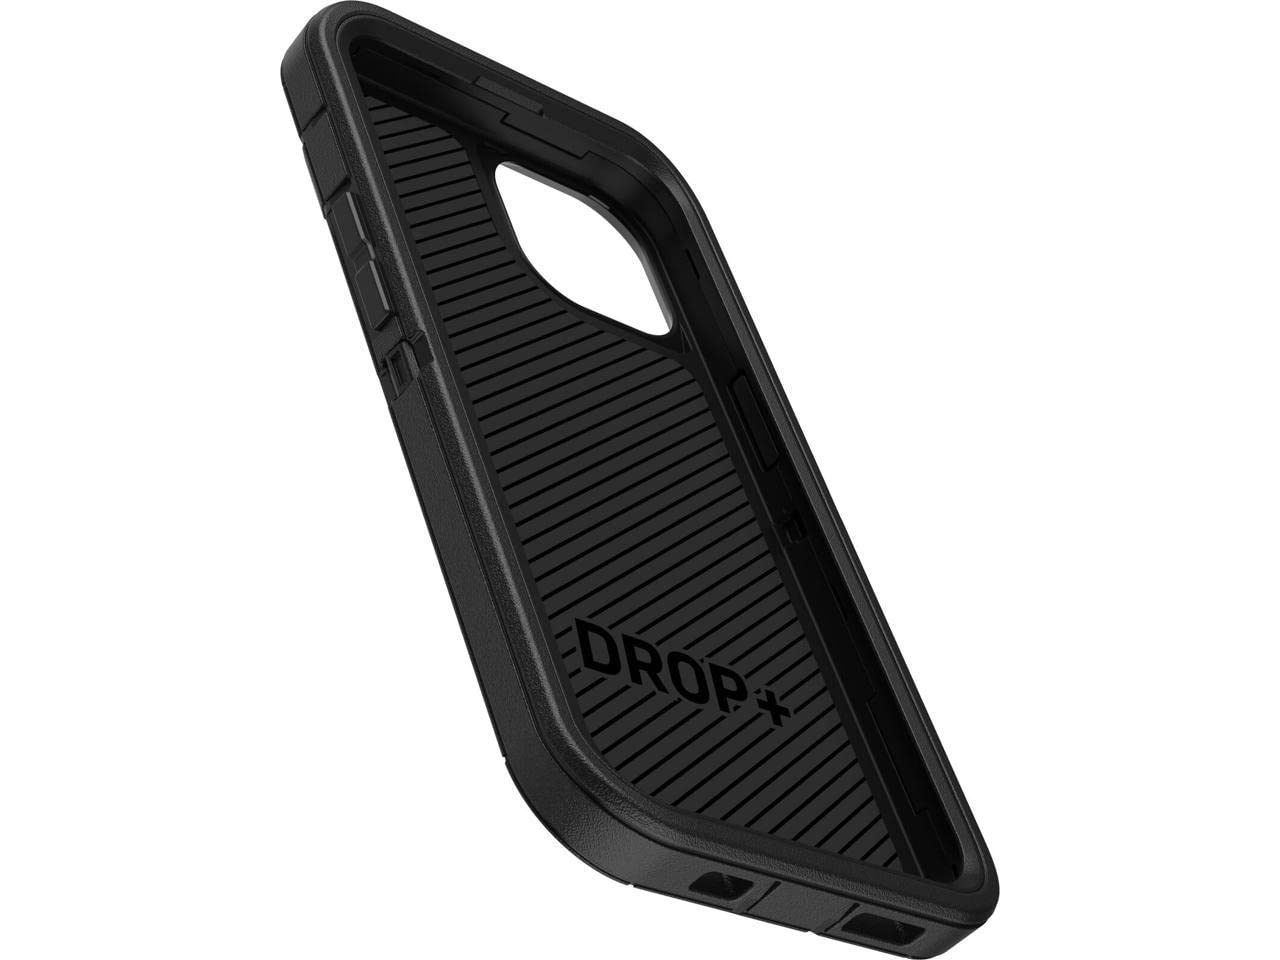 OtterBox iPhone 14 & iPhone 13 (Only) - Defender Series Case - Black - Rugged & Durable - with Port Protection - Includes Holster Clip Kickstand - Non-Retail Packaging